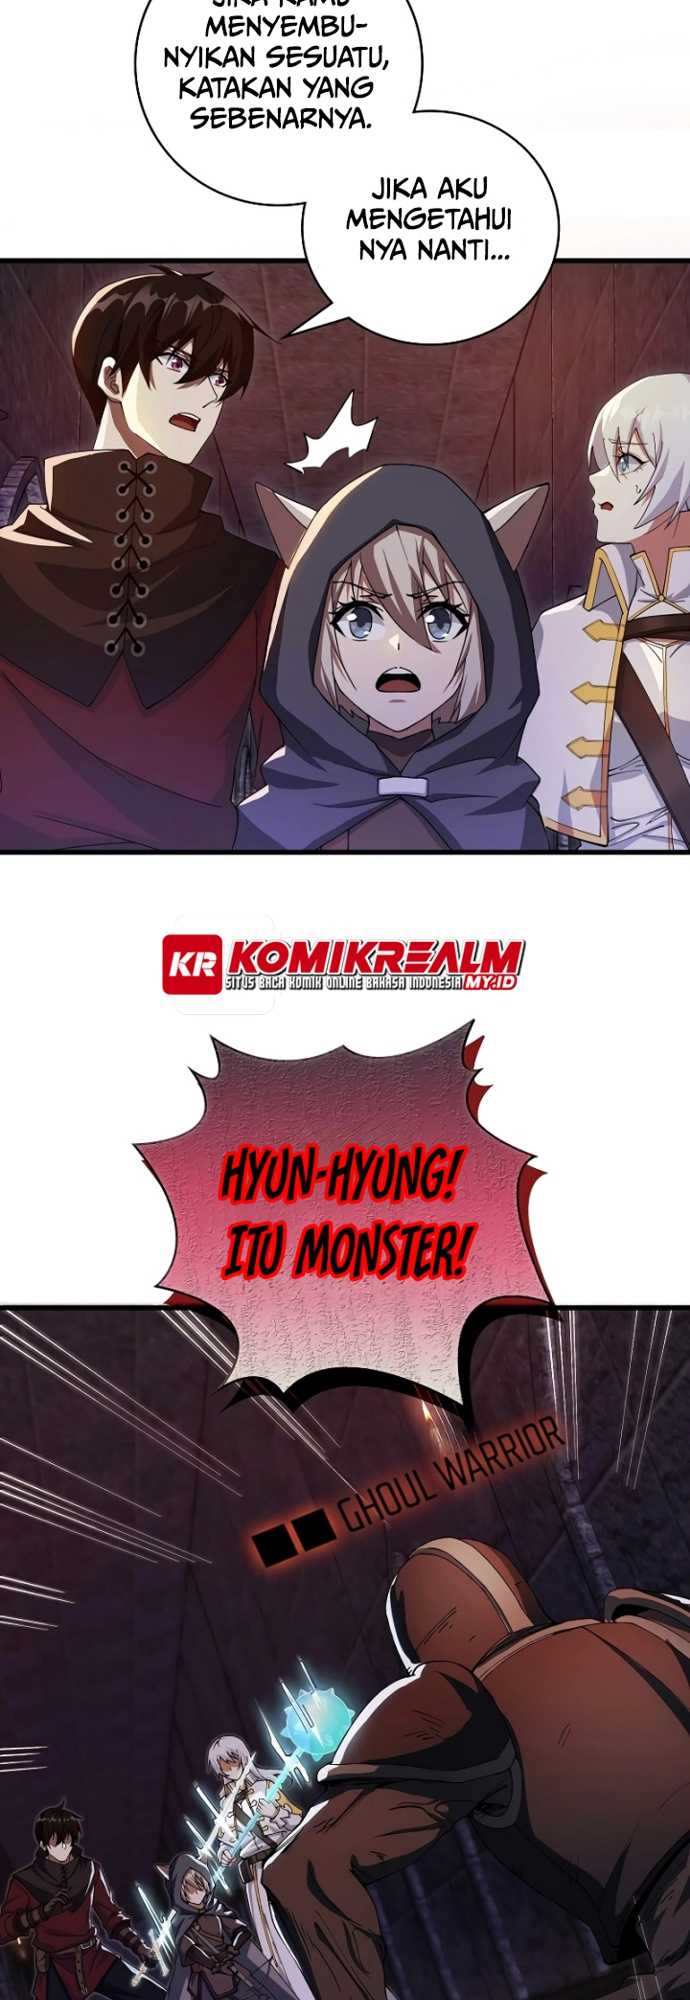 Logging in as a Monster Chapter 07